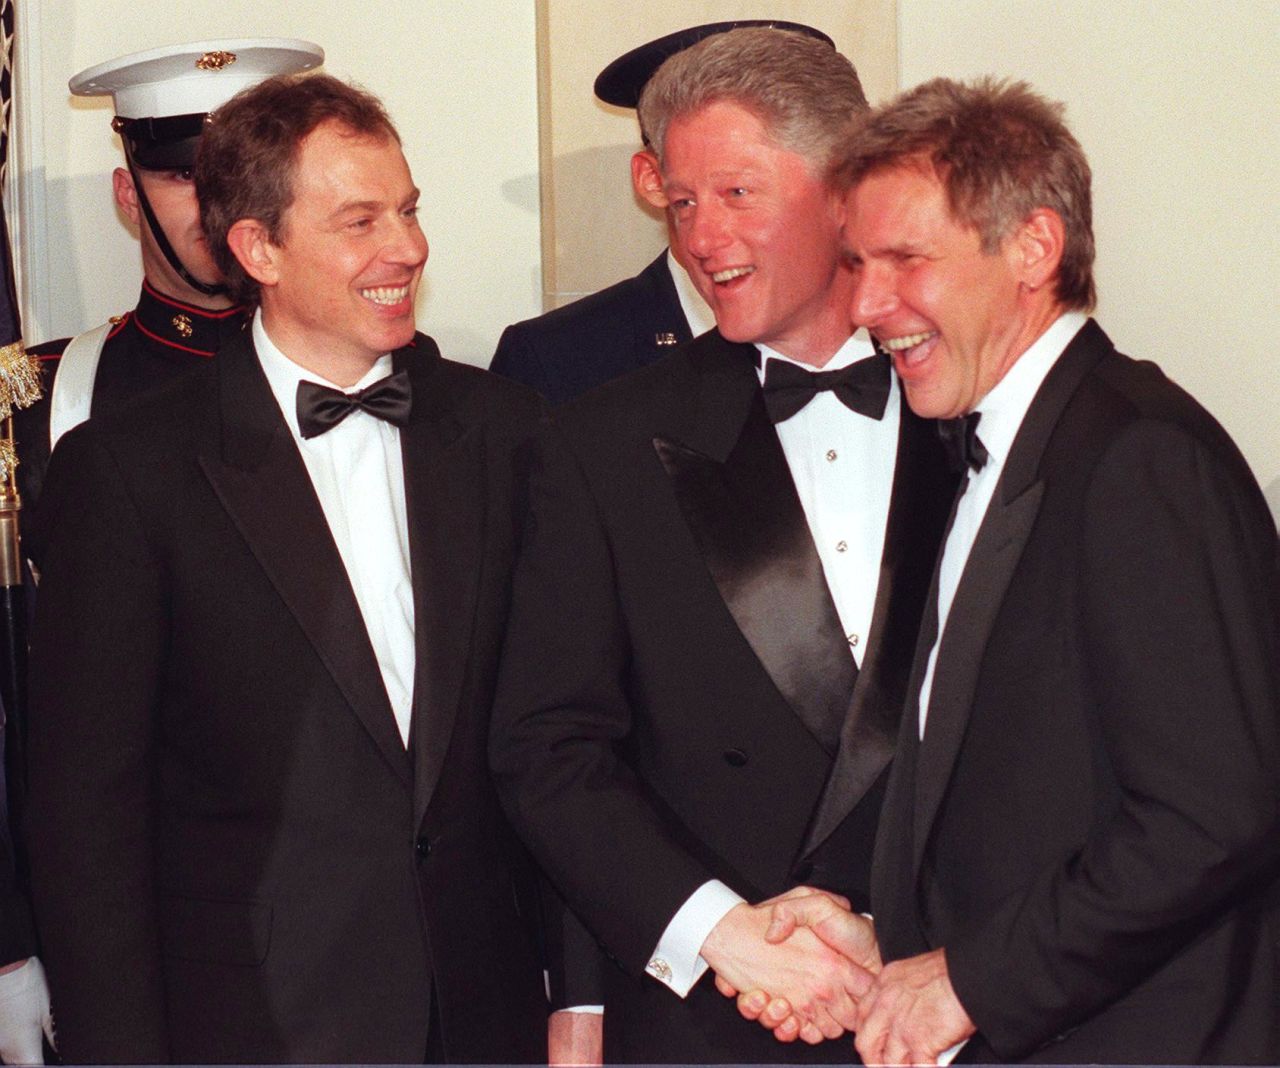 Ford is greeted by President Bill Clinton and British Prime Minister Tony Blair during a state dinner at the White House in 2005.